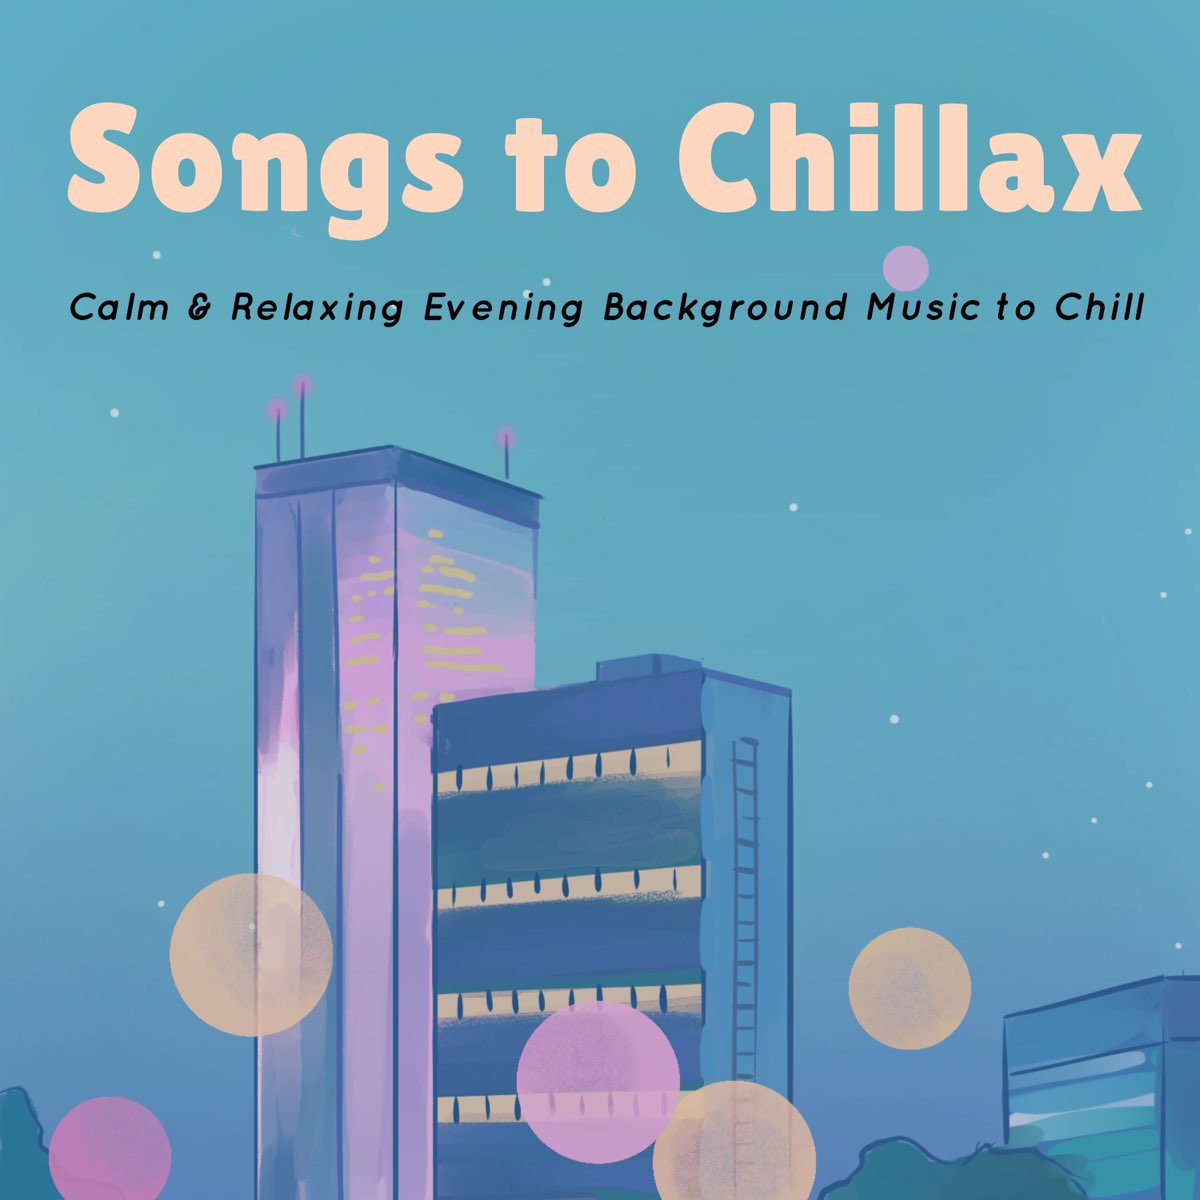 Songs to Chillax - Calm & Relaxing Evening Background Music to Chill by  Chill Radio on Apple Music